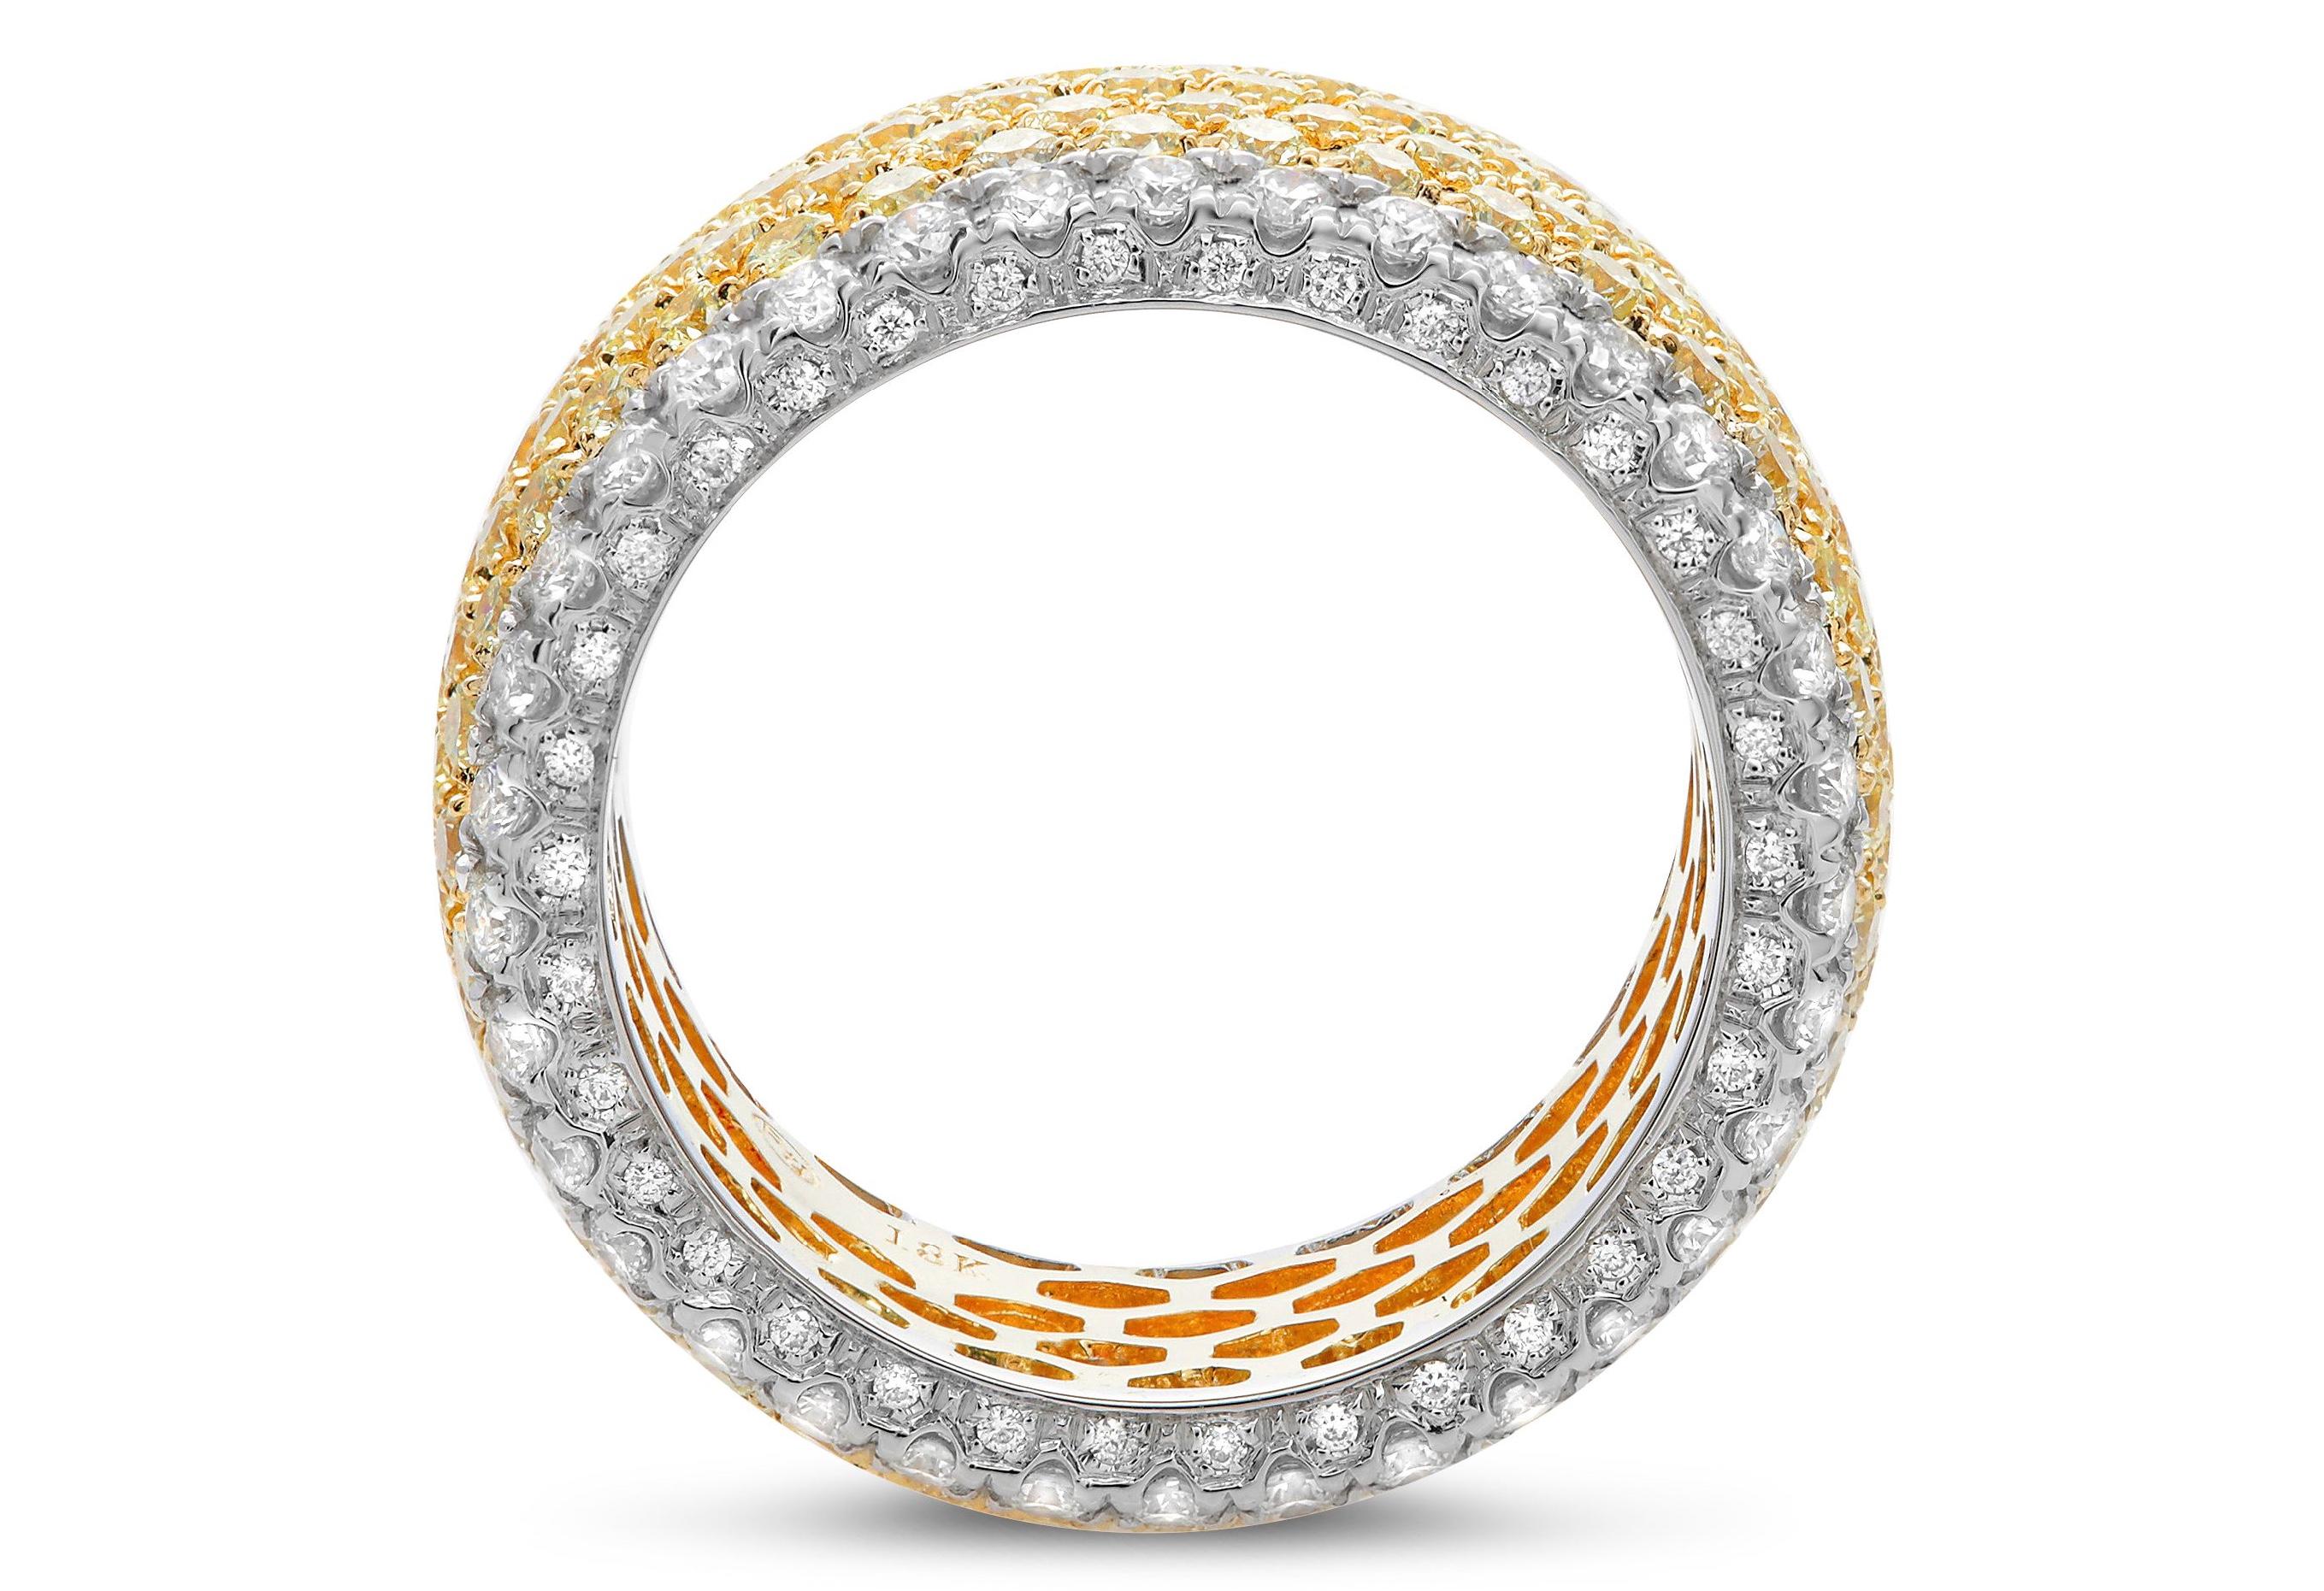 18K Gold Eternity Ring Set With Approximately 3.05ct Of Yellow Round Brilliant Diamonds And Approximately 1.23ct Of White Round Brilliant Diamonds
8.4dwt(13.0g)
Size 7
Shank Thickness 2.88

This stunning 18K gold eternity ring is a true masterpiece.